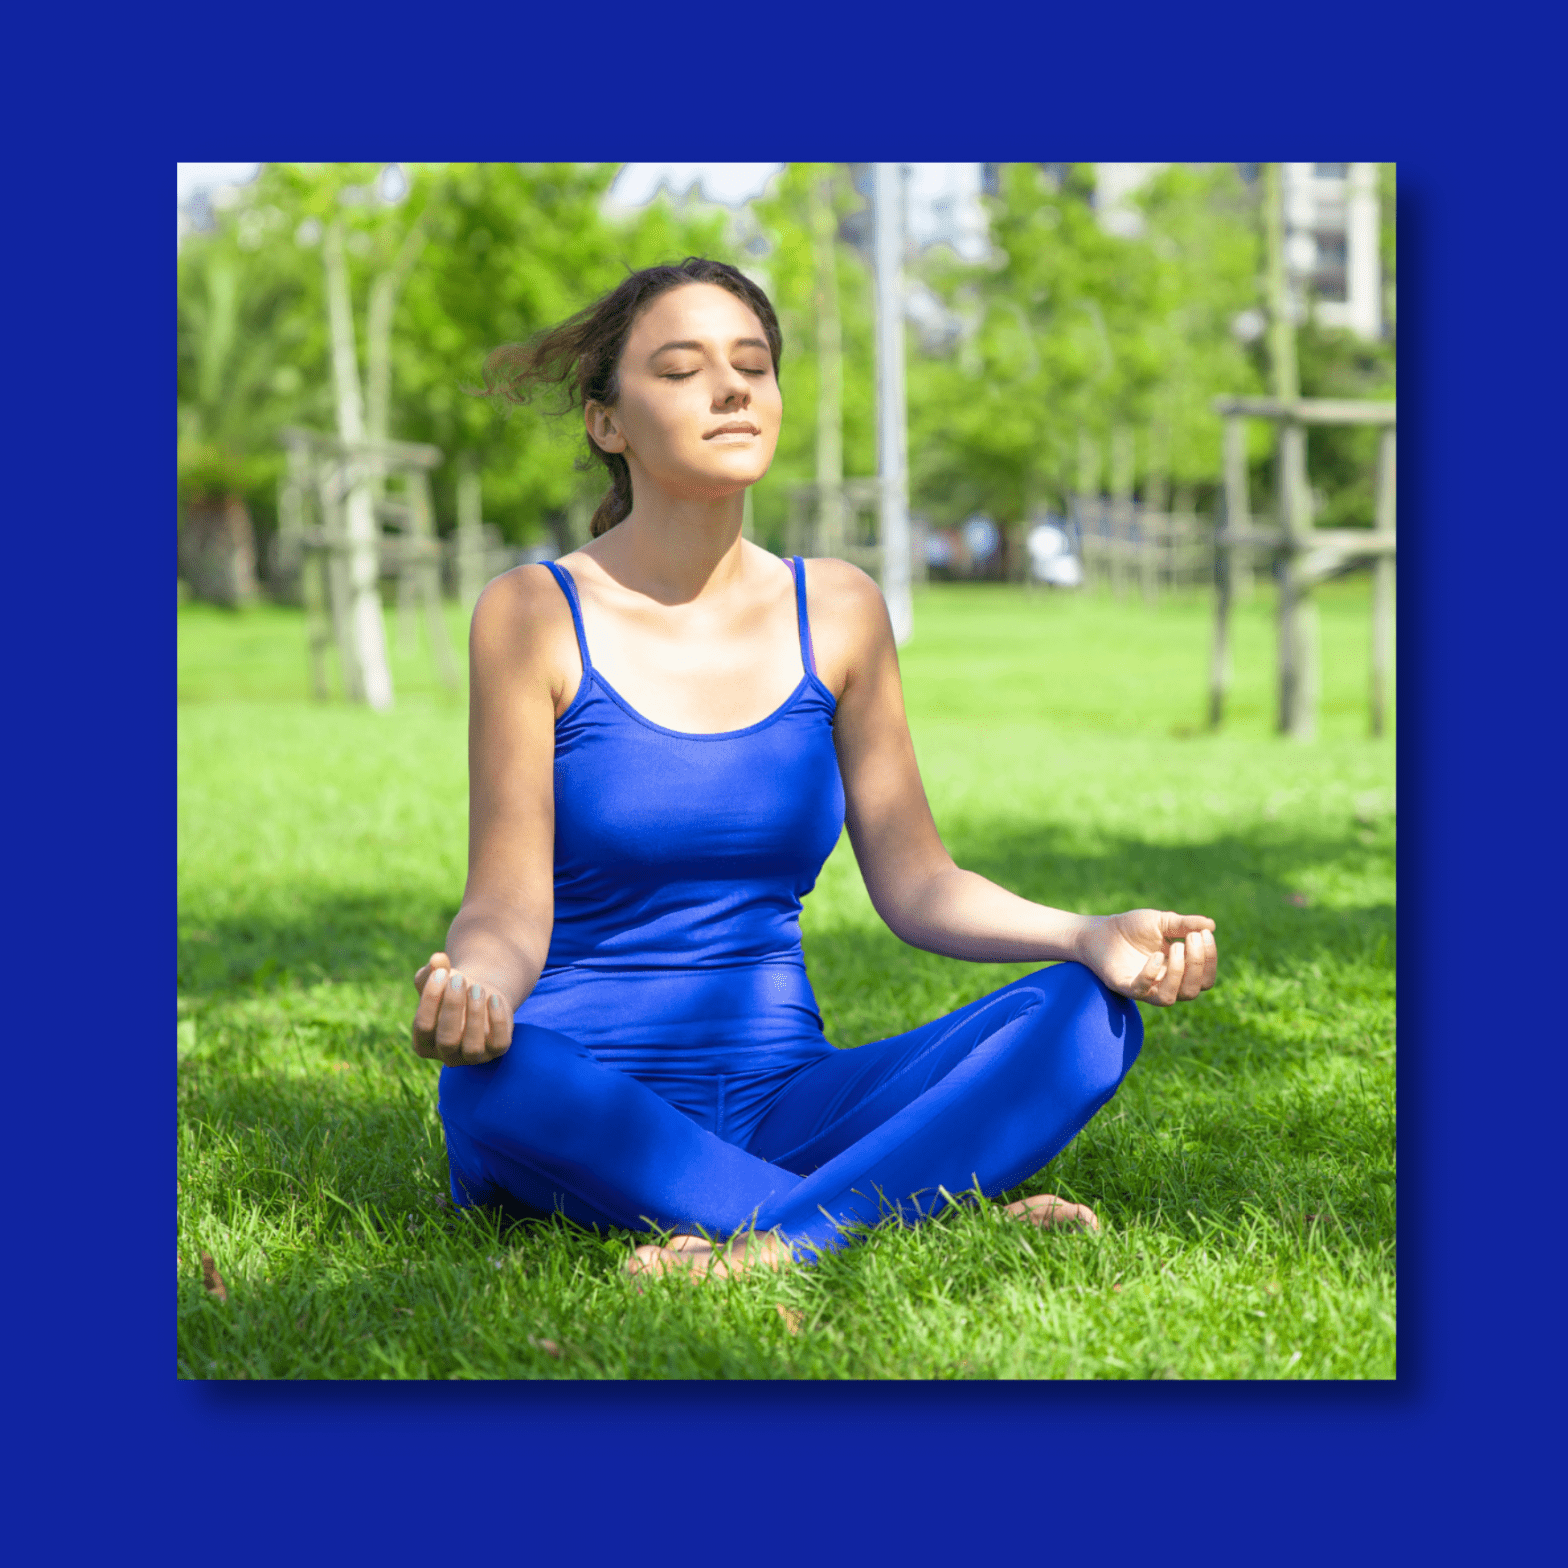 Learn about the benefits of breathwork and how to use your breath to improve your overall well-being.